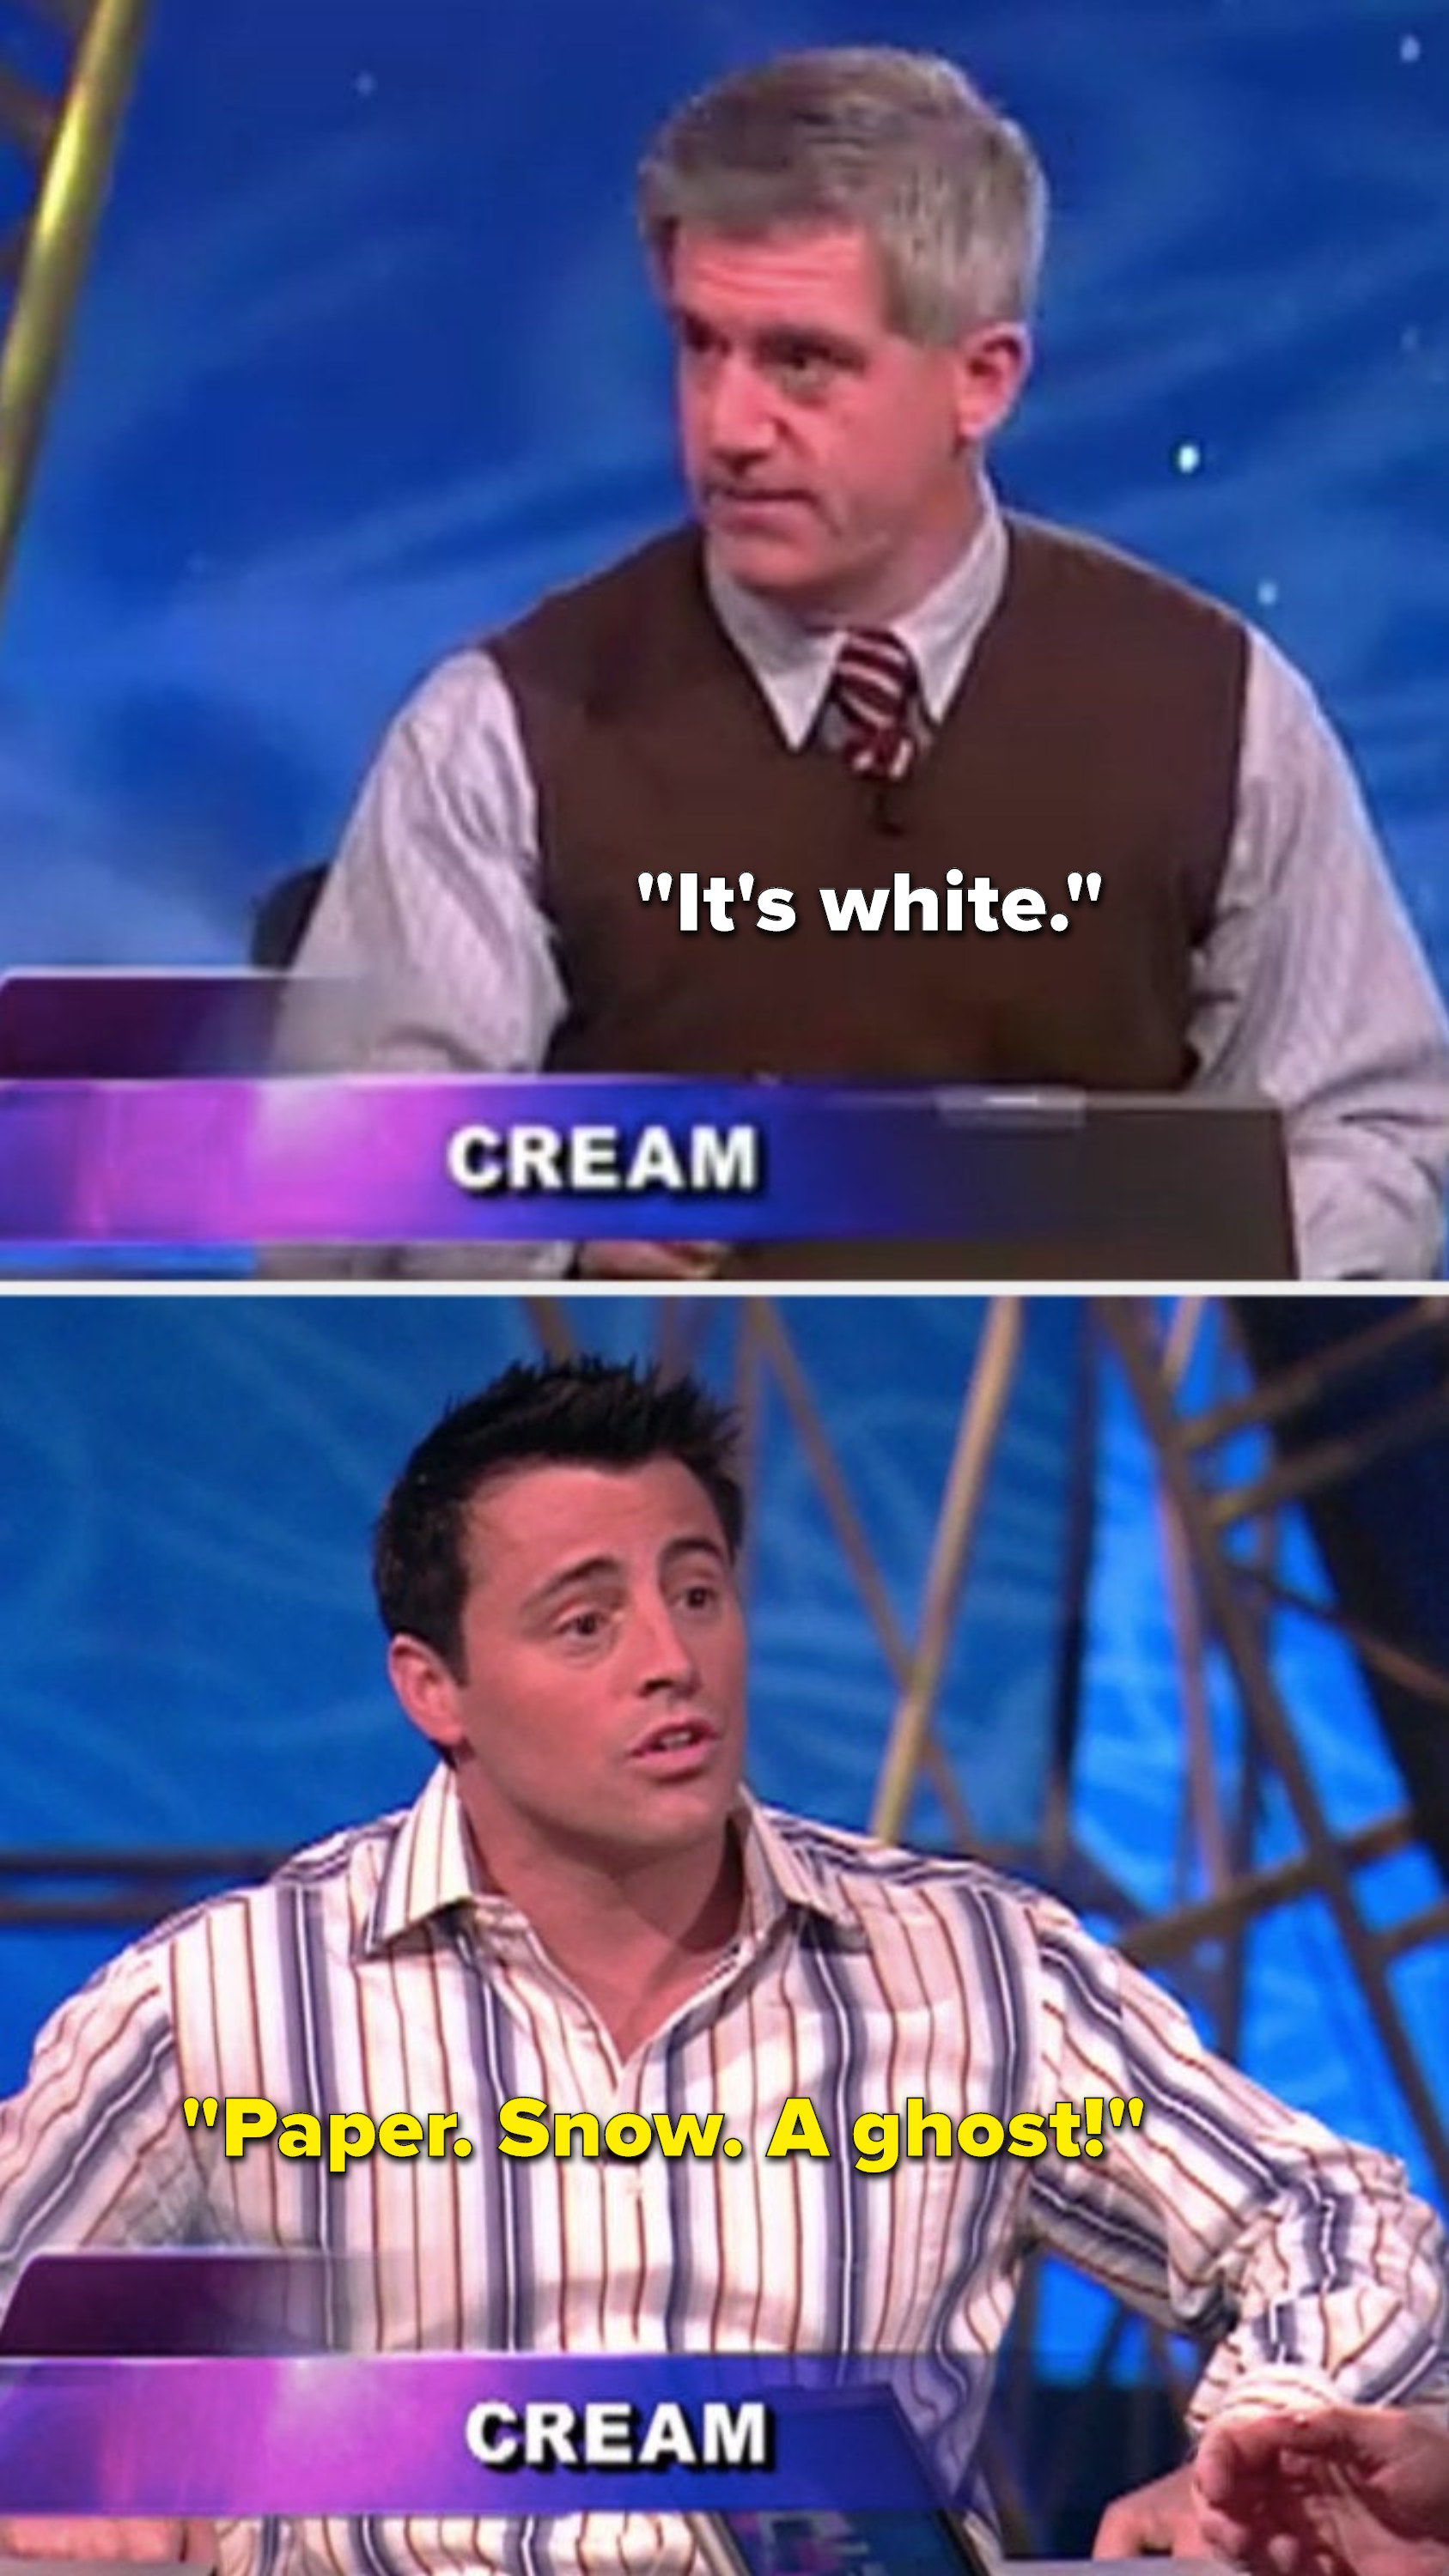 The word is cream, Joey&#x27;s partner says, &quot;It&#x27;s white&quot; and Joey says, &quot;Paper, snow, a ghost&quot;